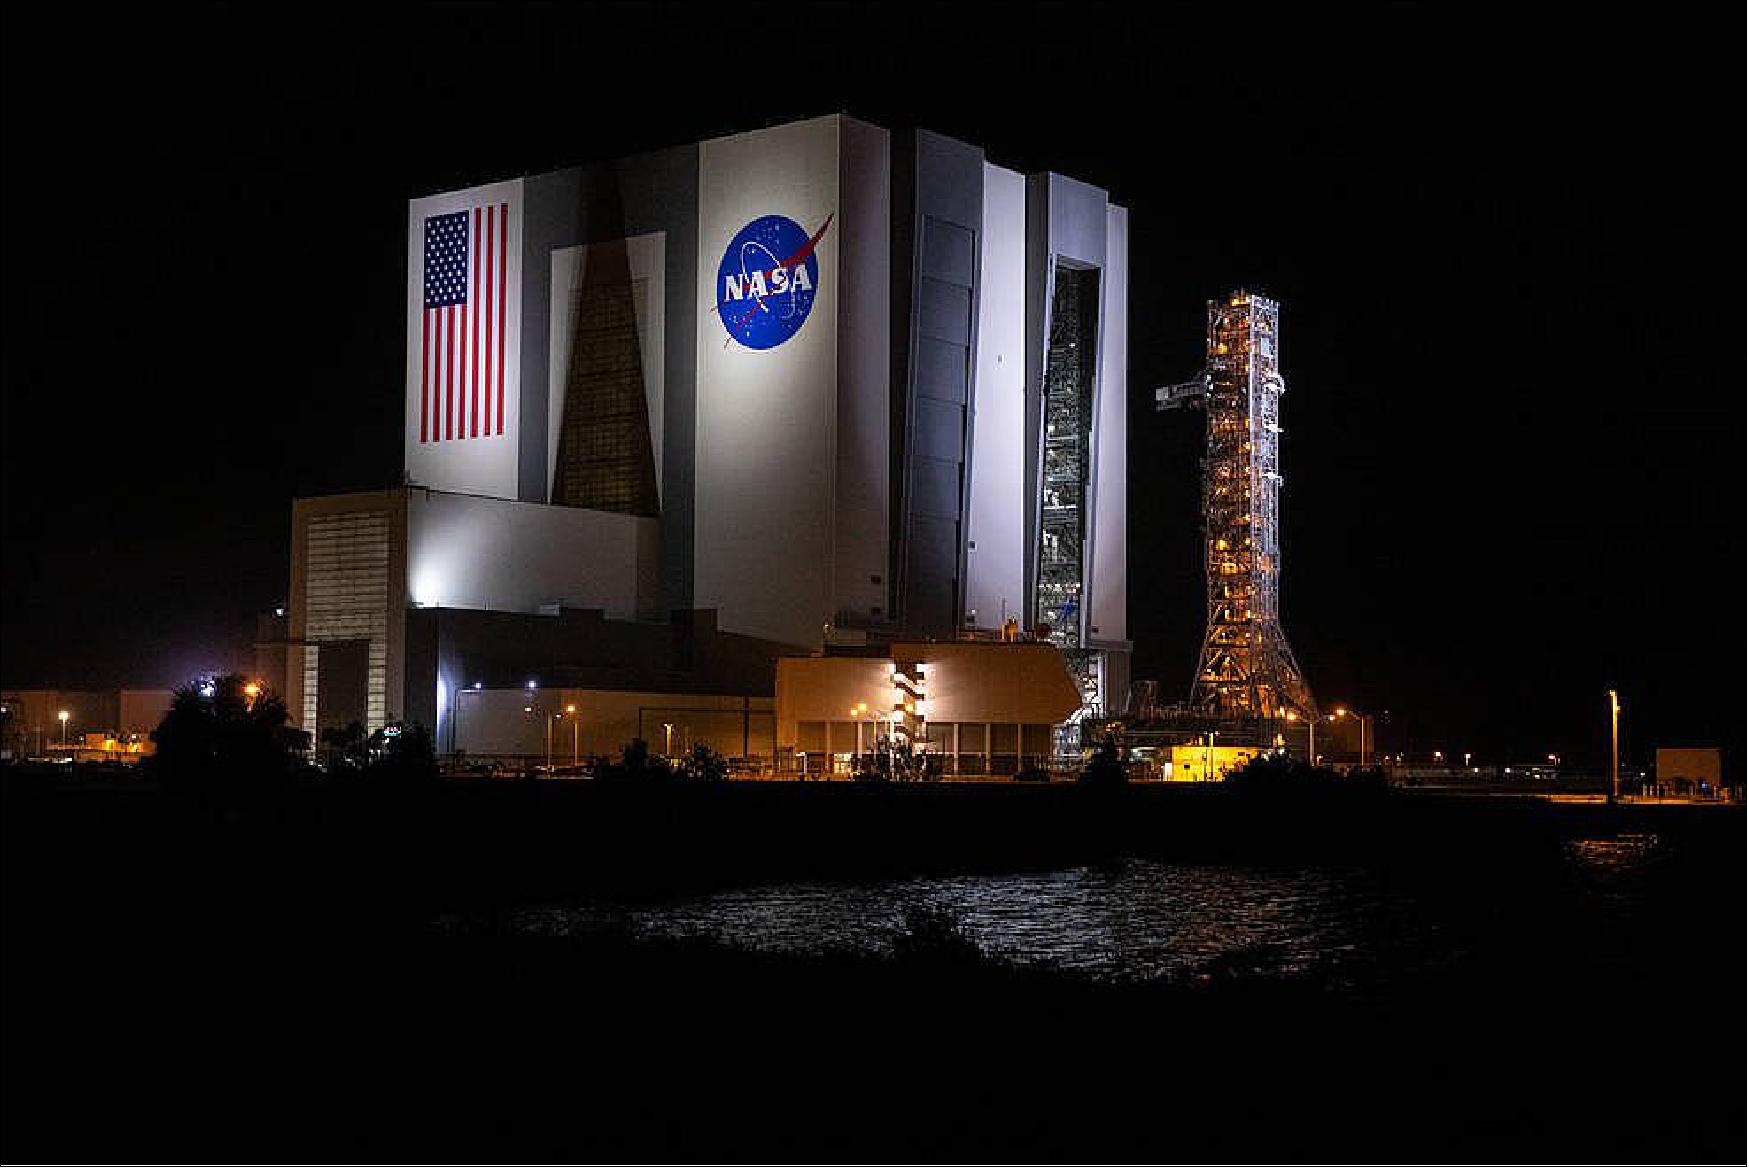 Figure 20: The mobile launcher for Artemis I begins rollout from the Vehicle Assembly Building atop crawler-transporter 2 in the early morning on Oct. 20, 2020, at NASA's Kennedy Space Center in Florida (image credit: NASA, Ben Smegelsky)